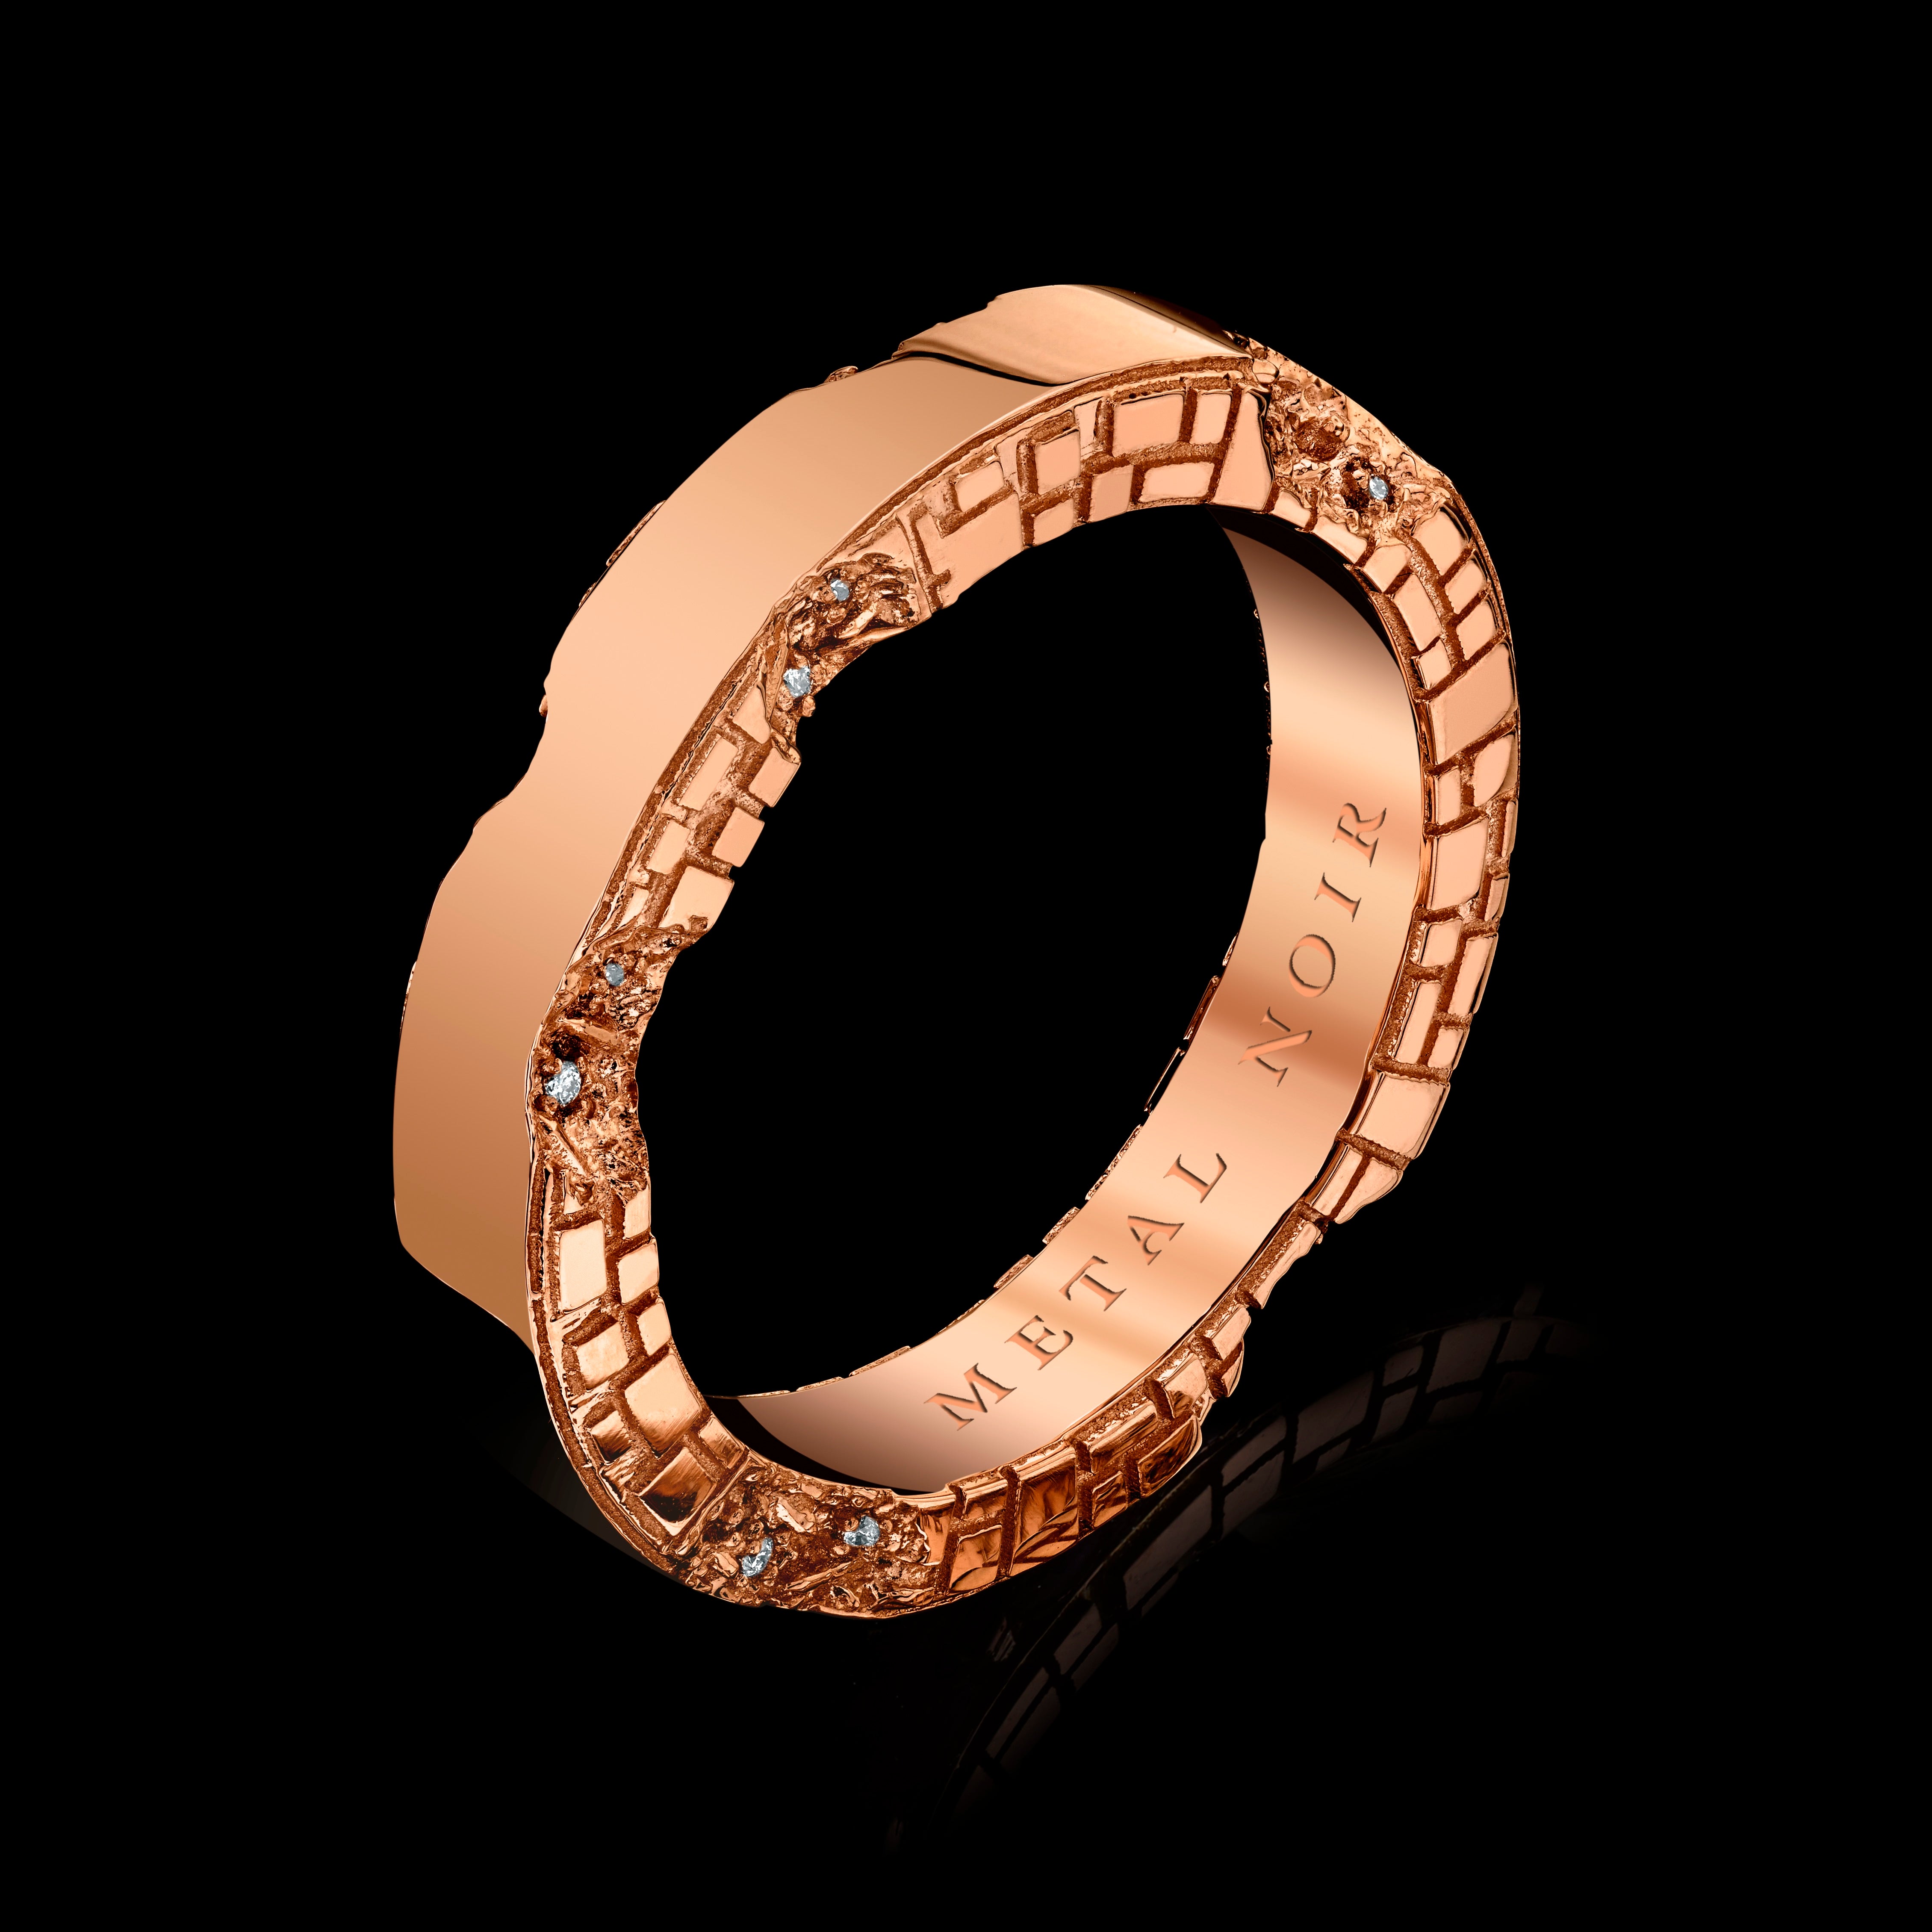 ‘Eroded Architecture’ Ring in solid 18k rose gold • Edition of 50